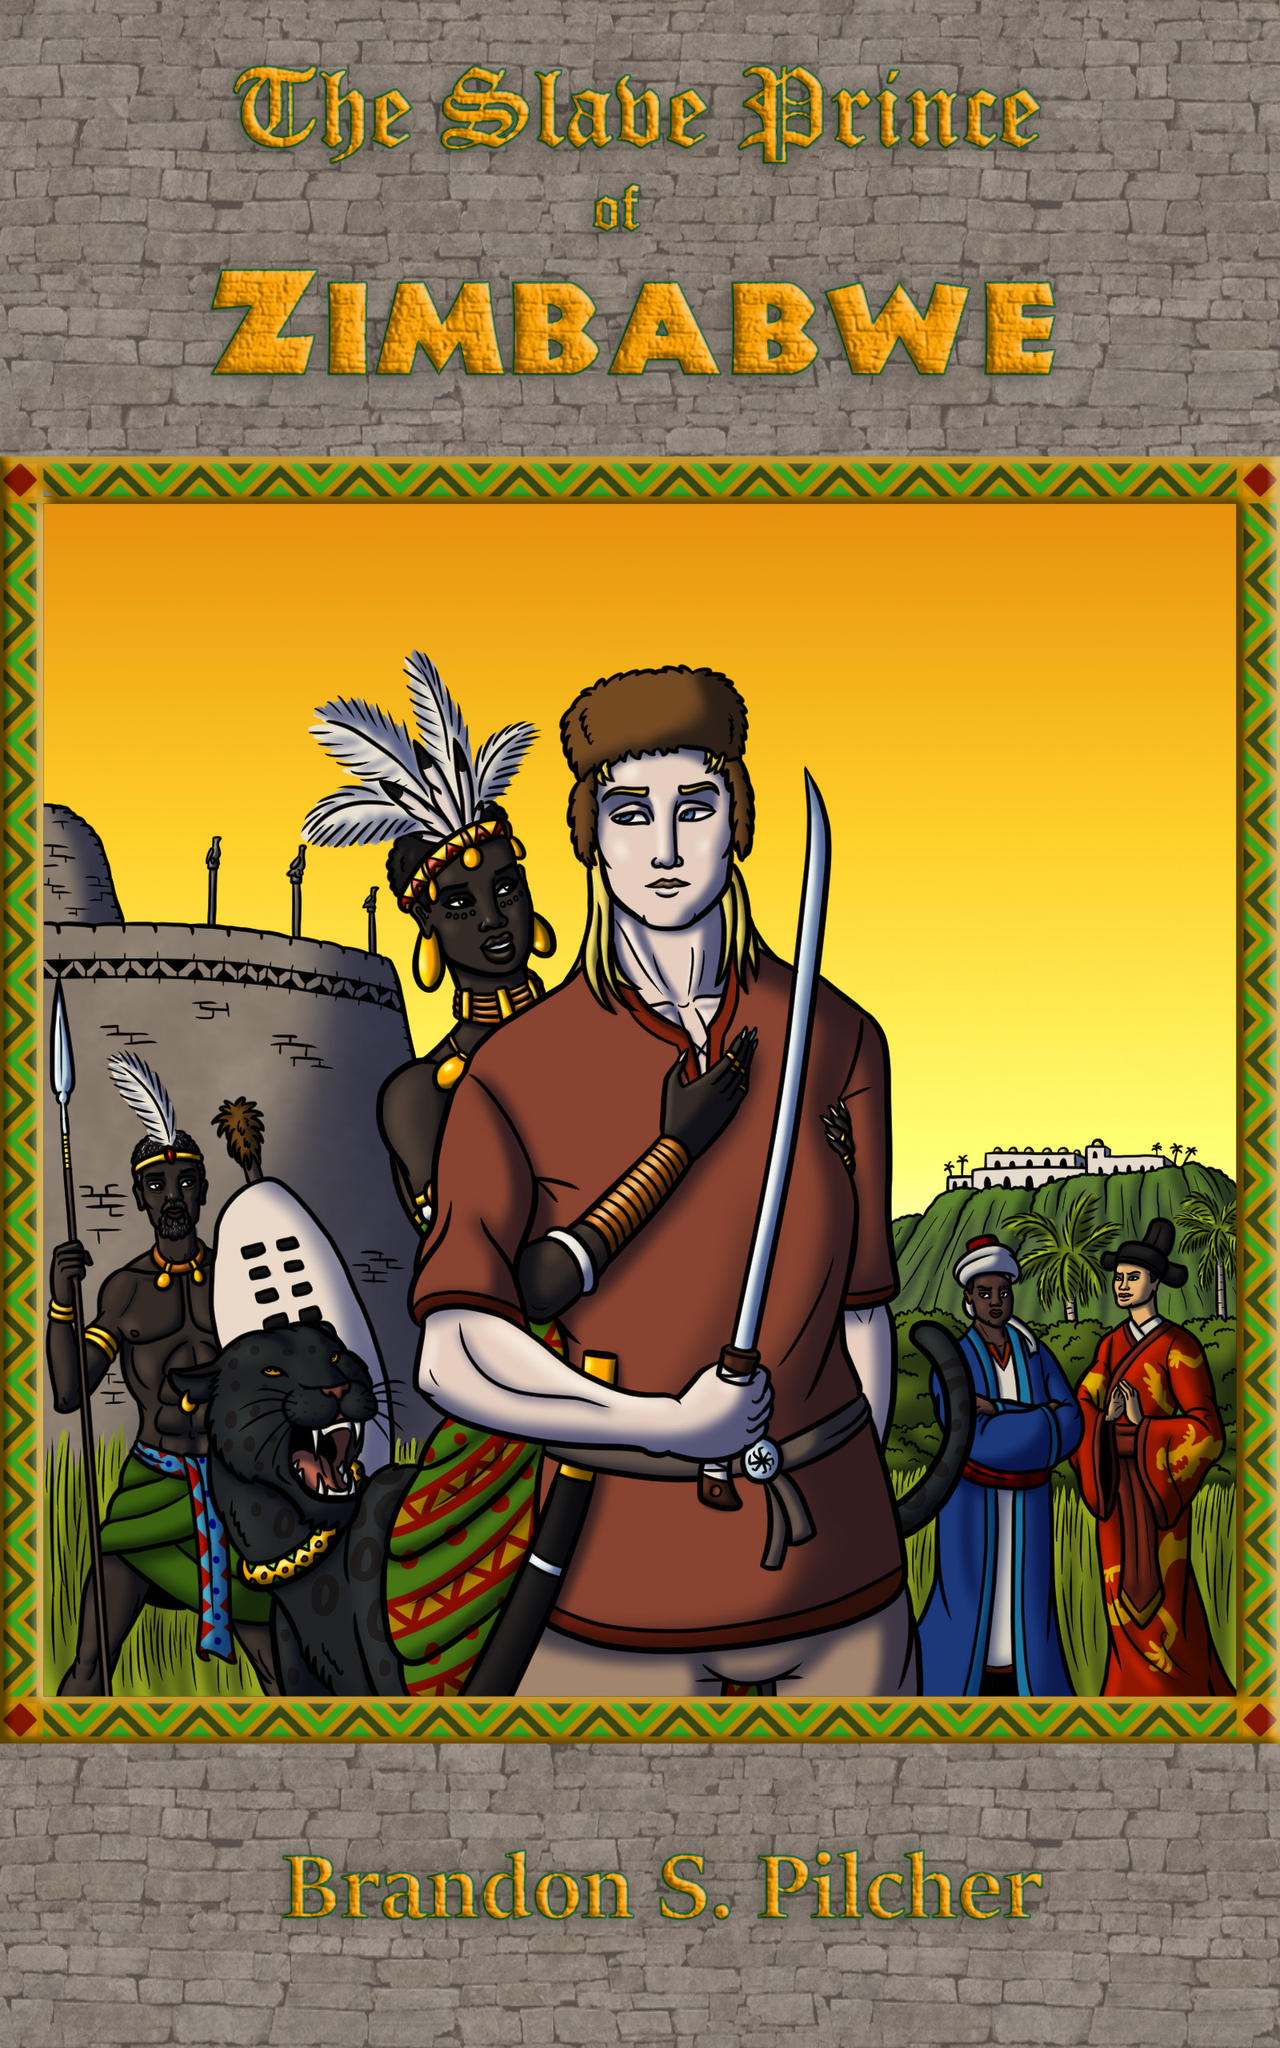 Book Cover - The Slave Prince of Zimbabwe